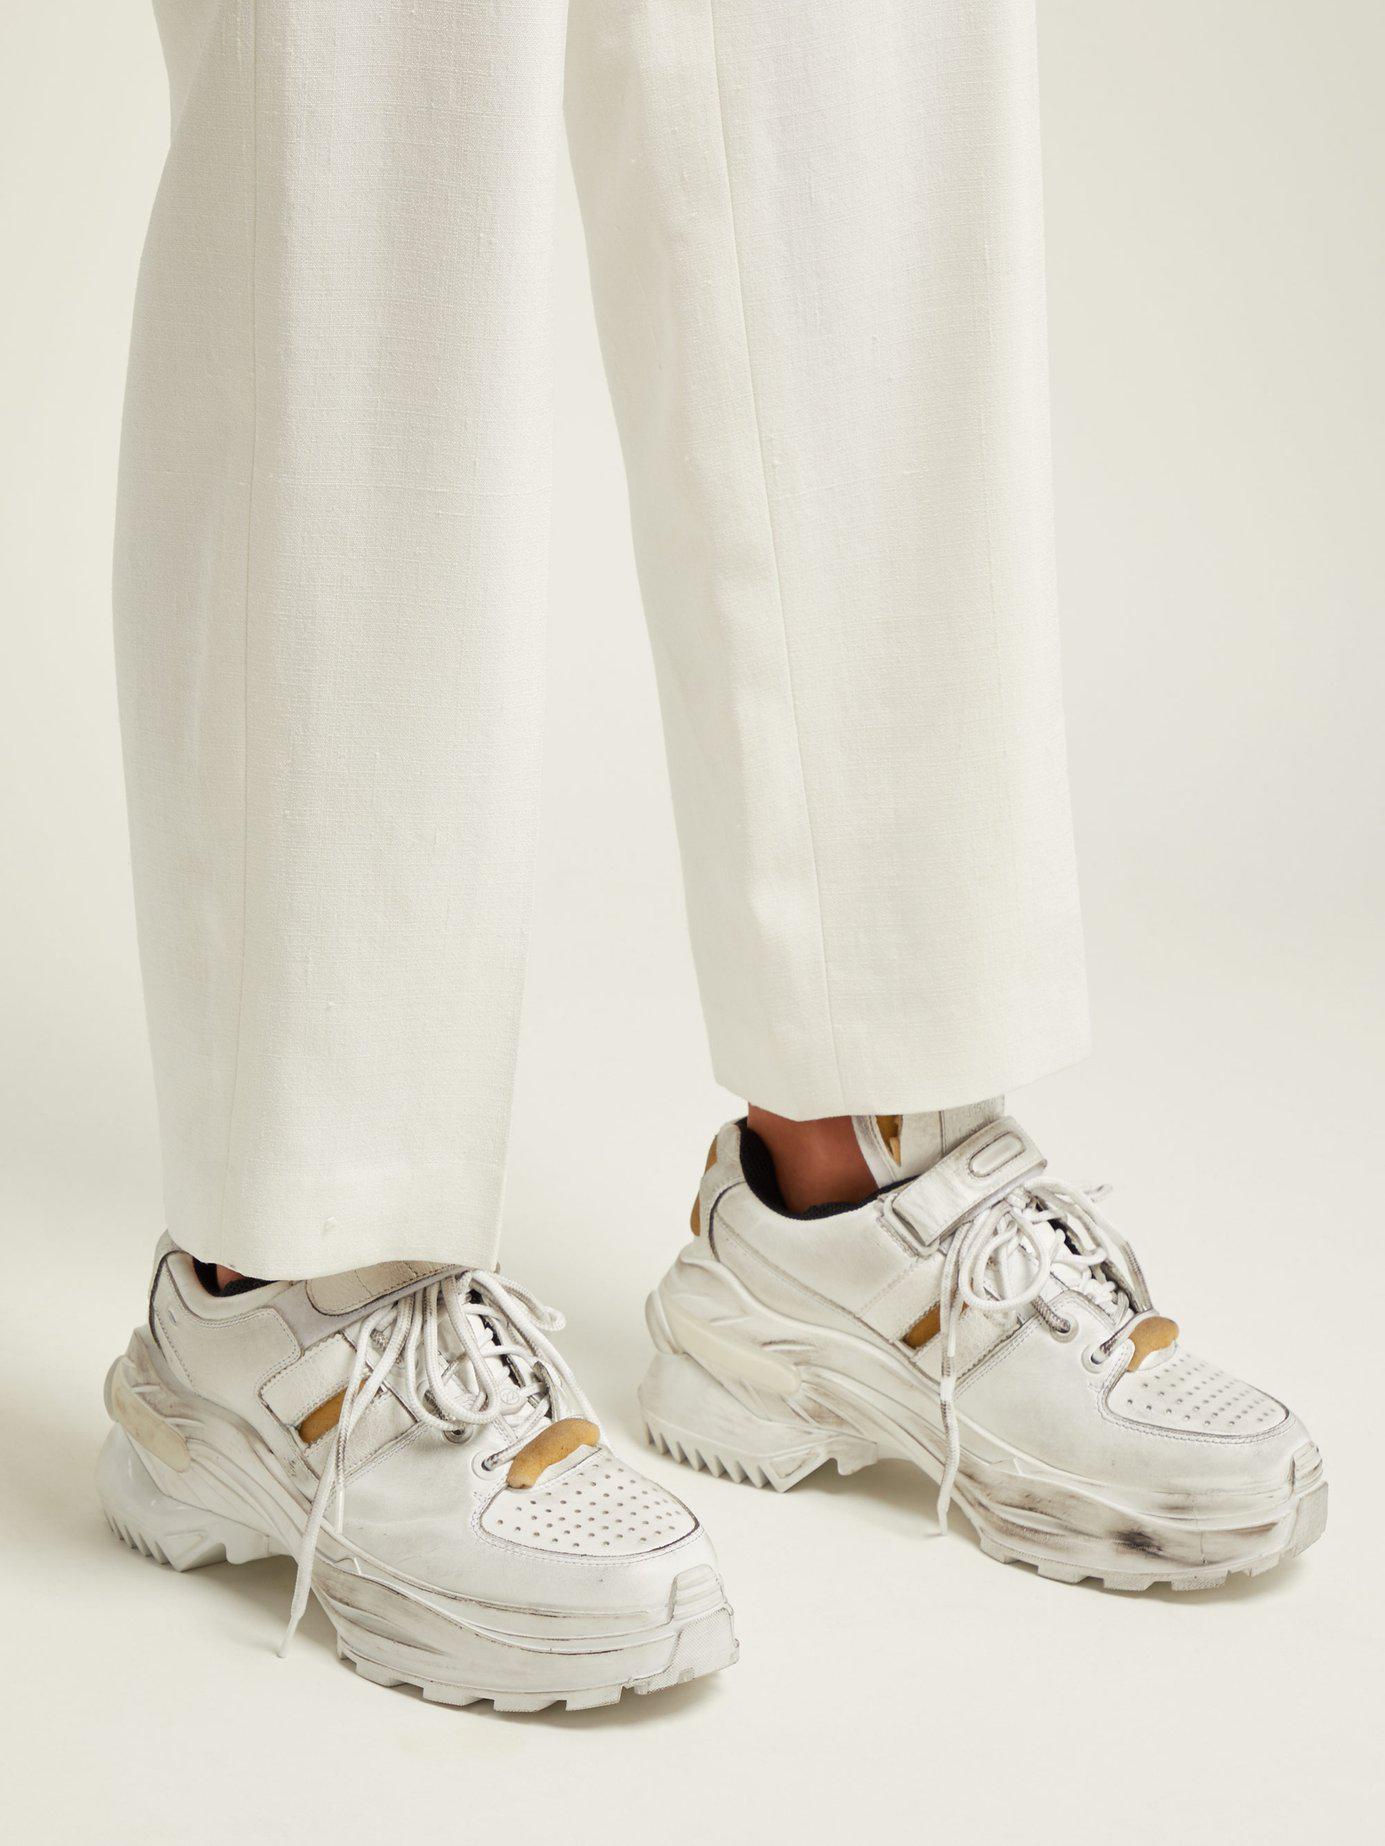 Maison Margiela Retro Fit Deconstructed Low-top Leather Trainers in White -  Lyst